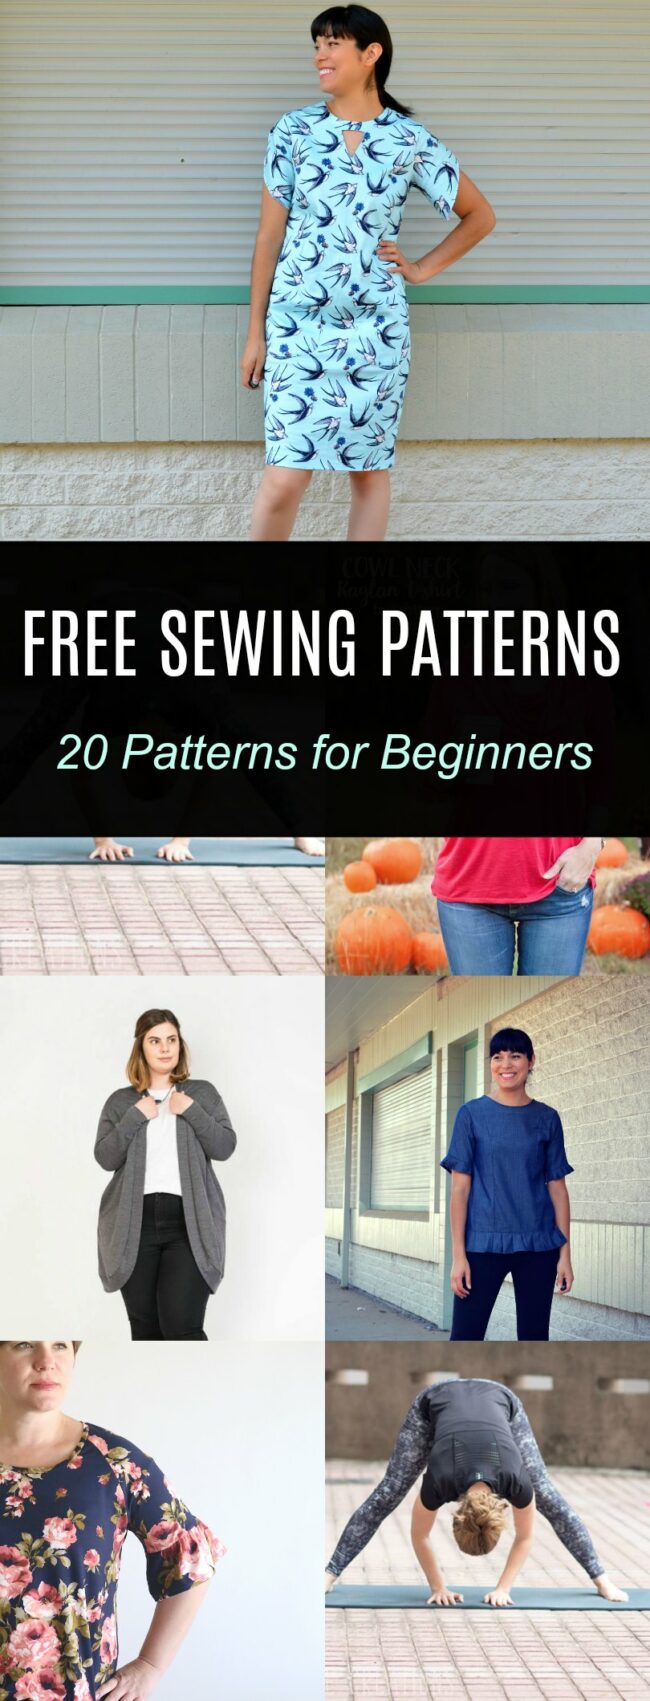 FREE PATTERN ALERT: 20 Sewing patterns for Beginners